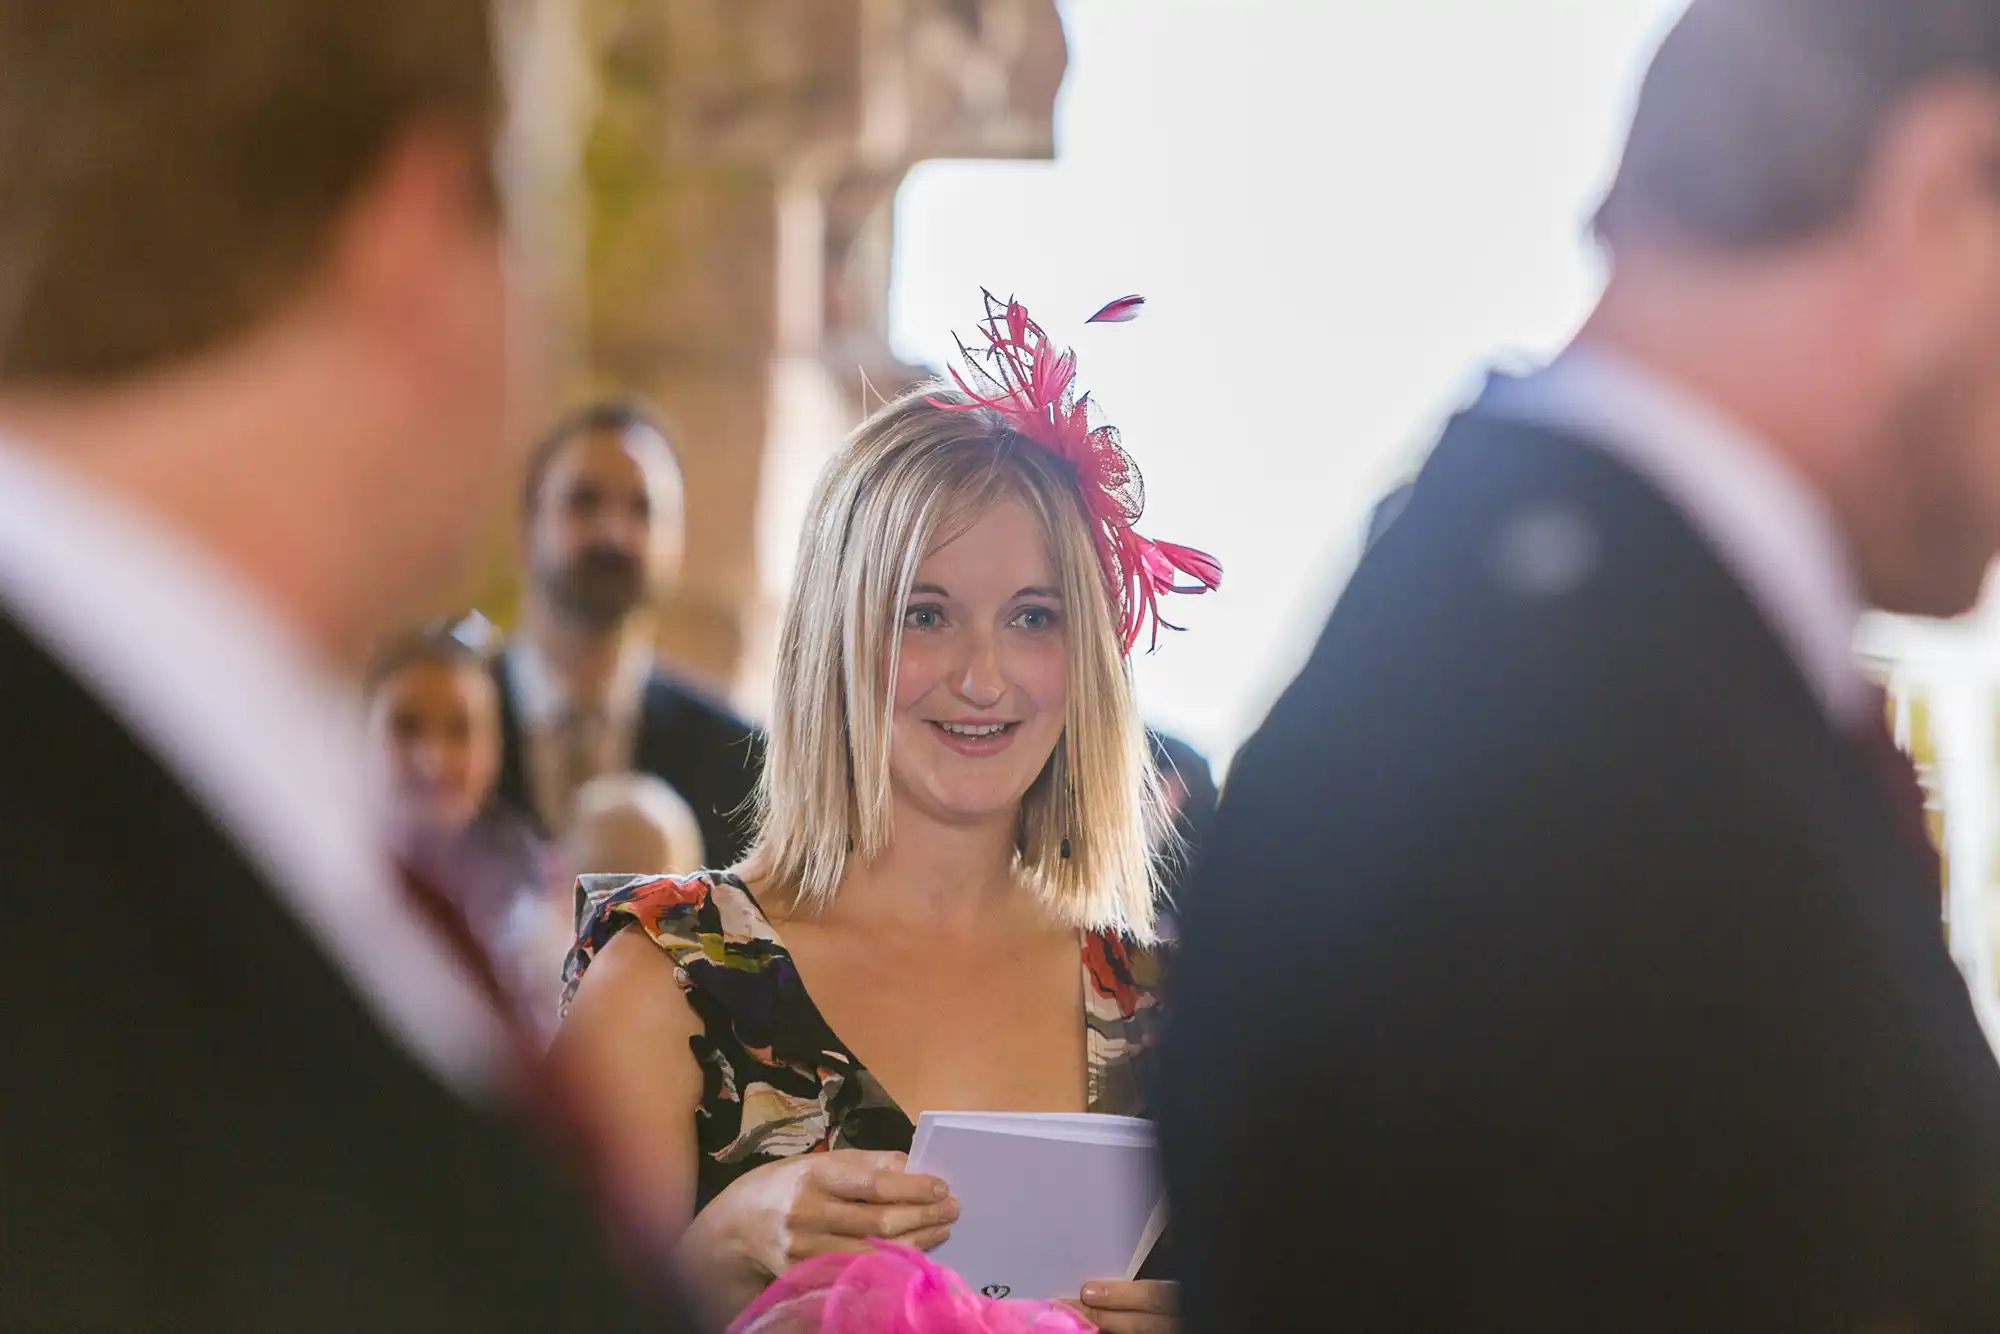 A woman in a floral dress and red fascinator smiles while holding a program at a social event, surrounded by other guests.